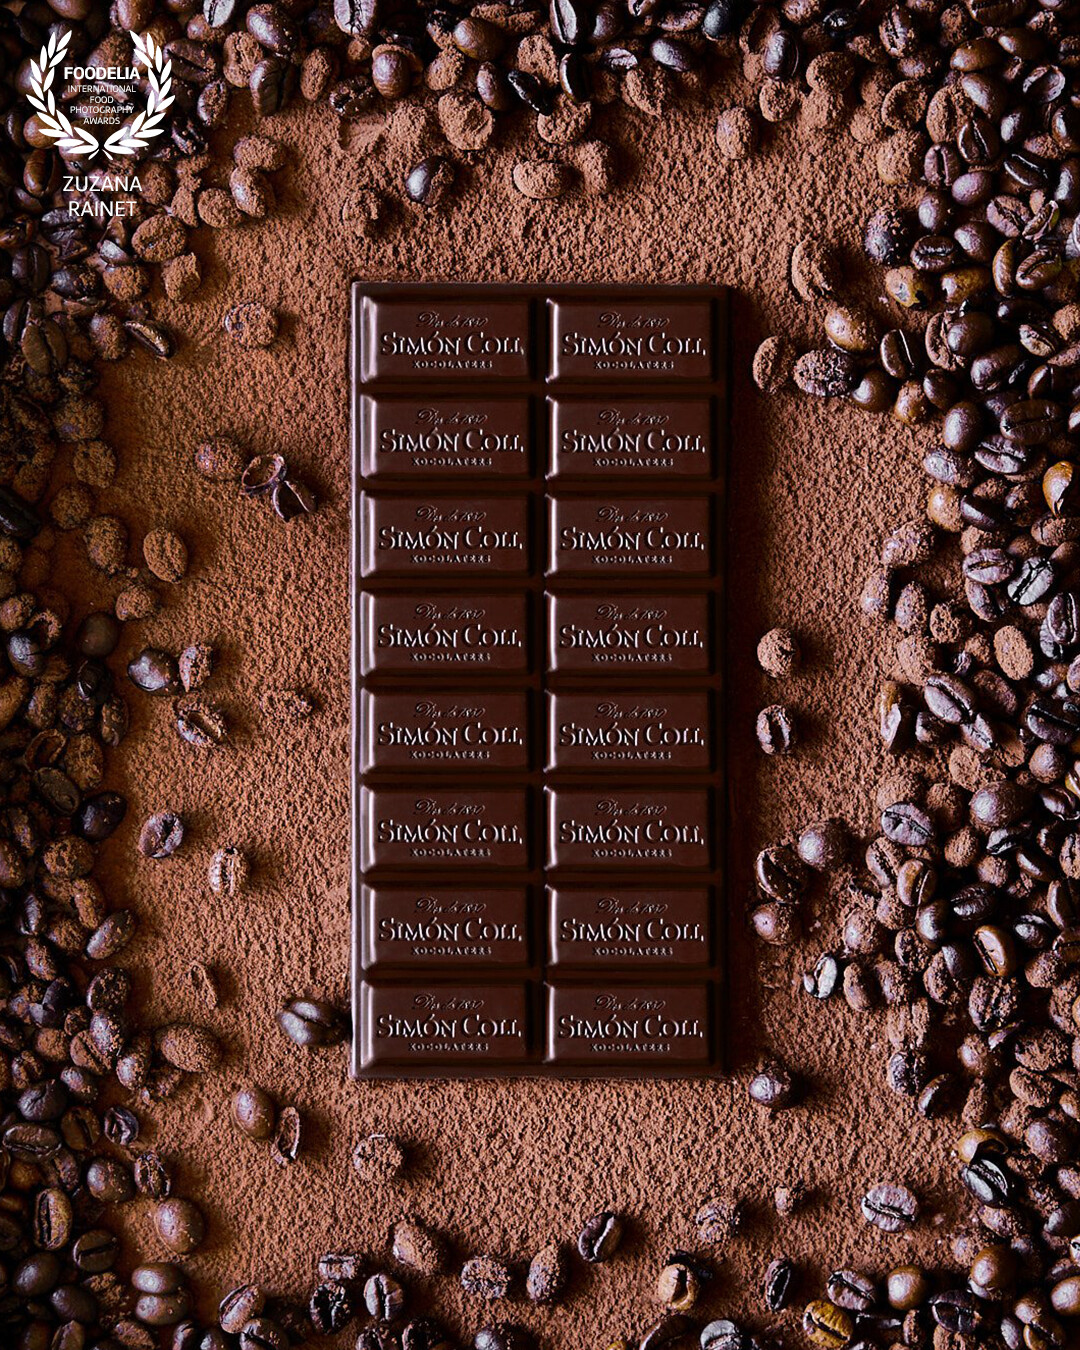 Simón Coll’s chocolate product images shot with natural light. The aim was to focus on high quality ingredients while still keeping the chocolate as the main hero. Ingredients such as cocoa powder and coffee beans were used to create the natural backdrop to support the chocolate’s quality. I shot the collection of three kinds of chocolate – coffee, orange and salt.